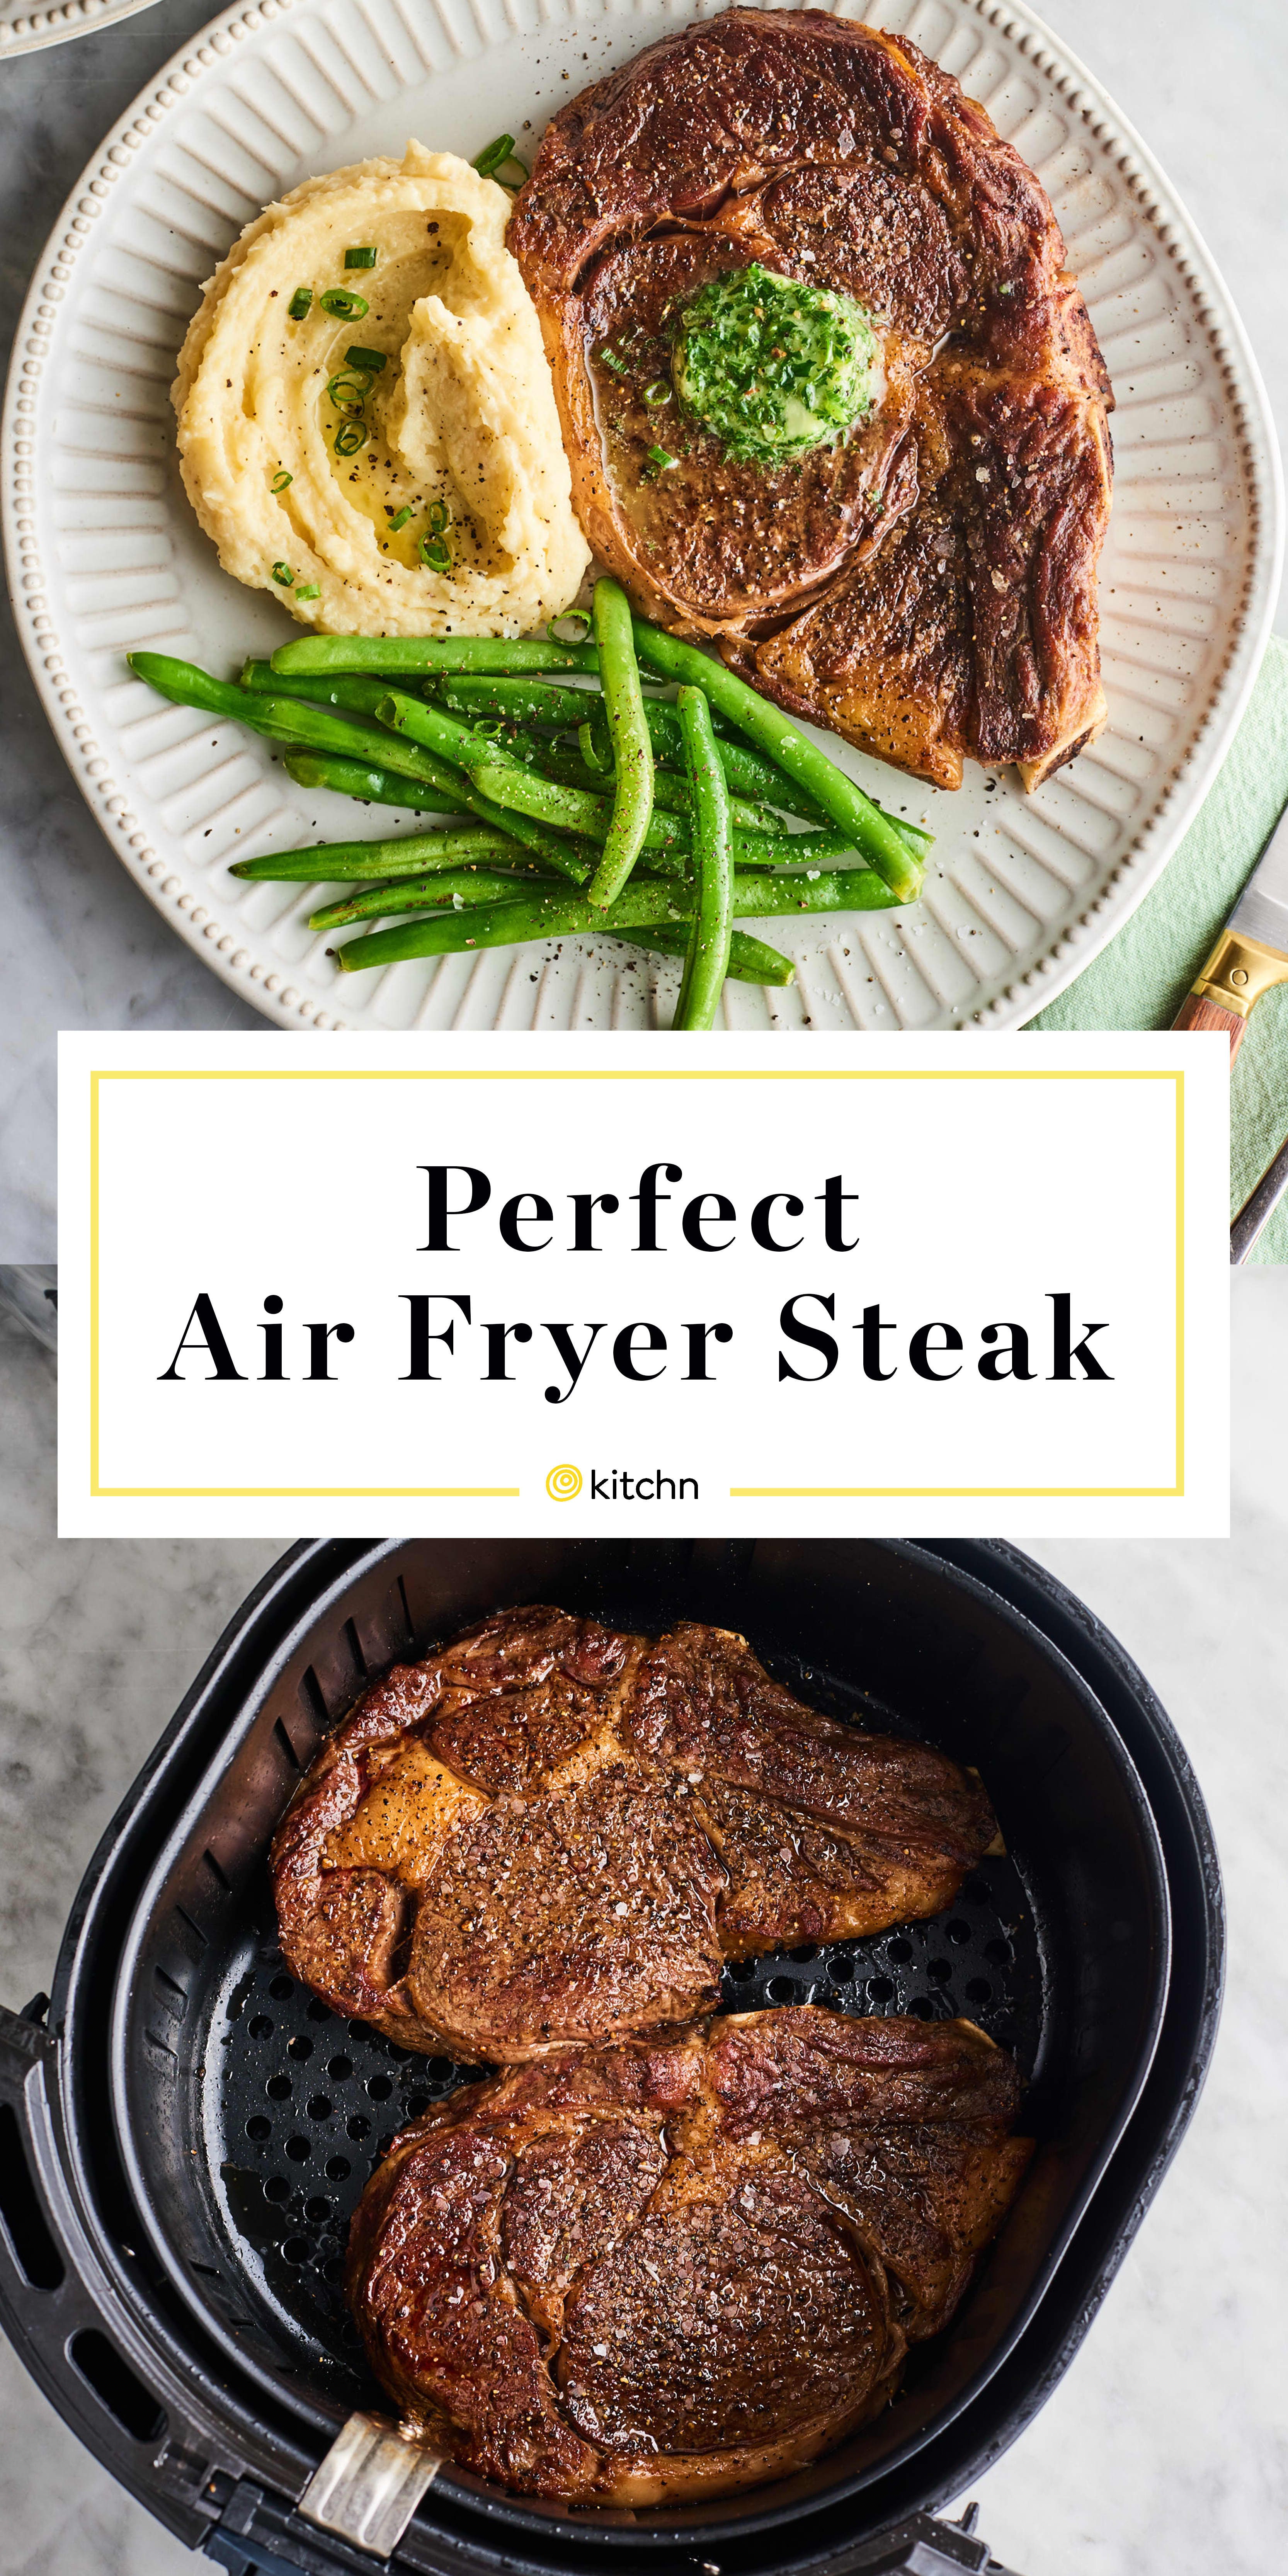 The Tin Foil Hack To Get A Better Sear On Air Fryer Steak